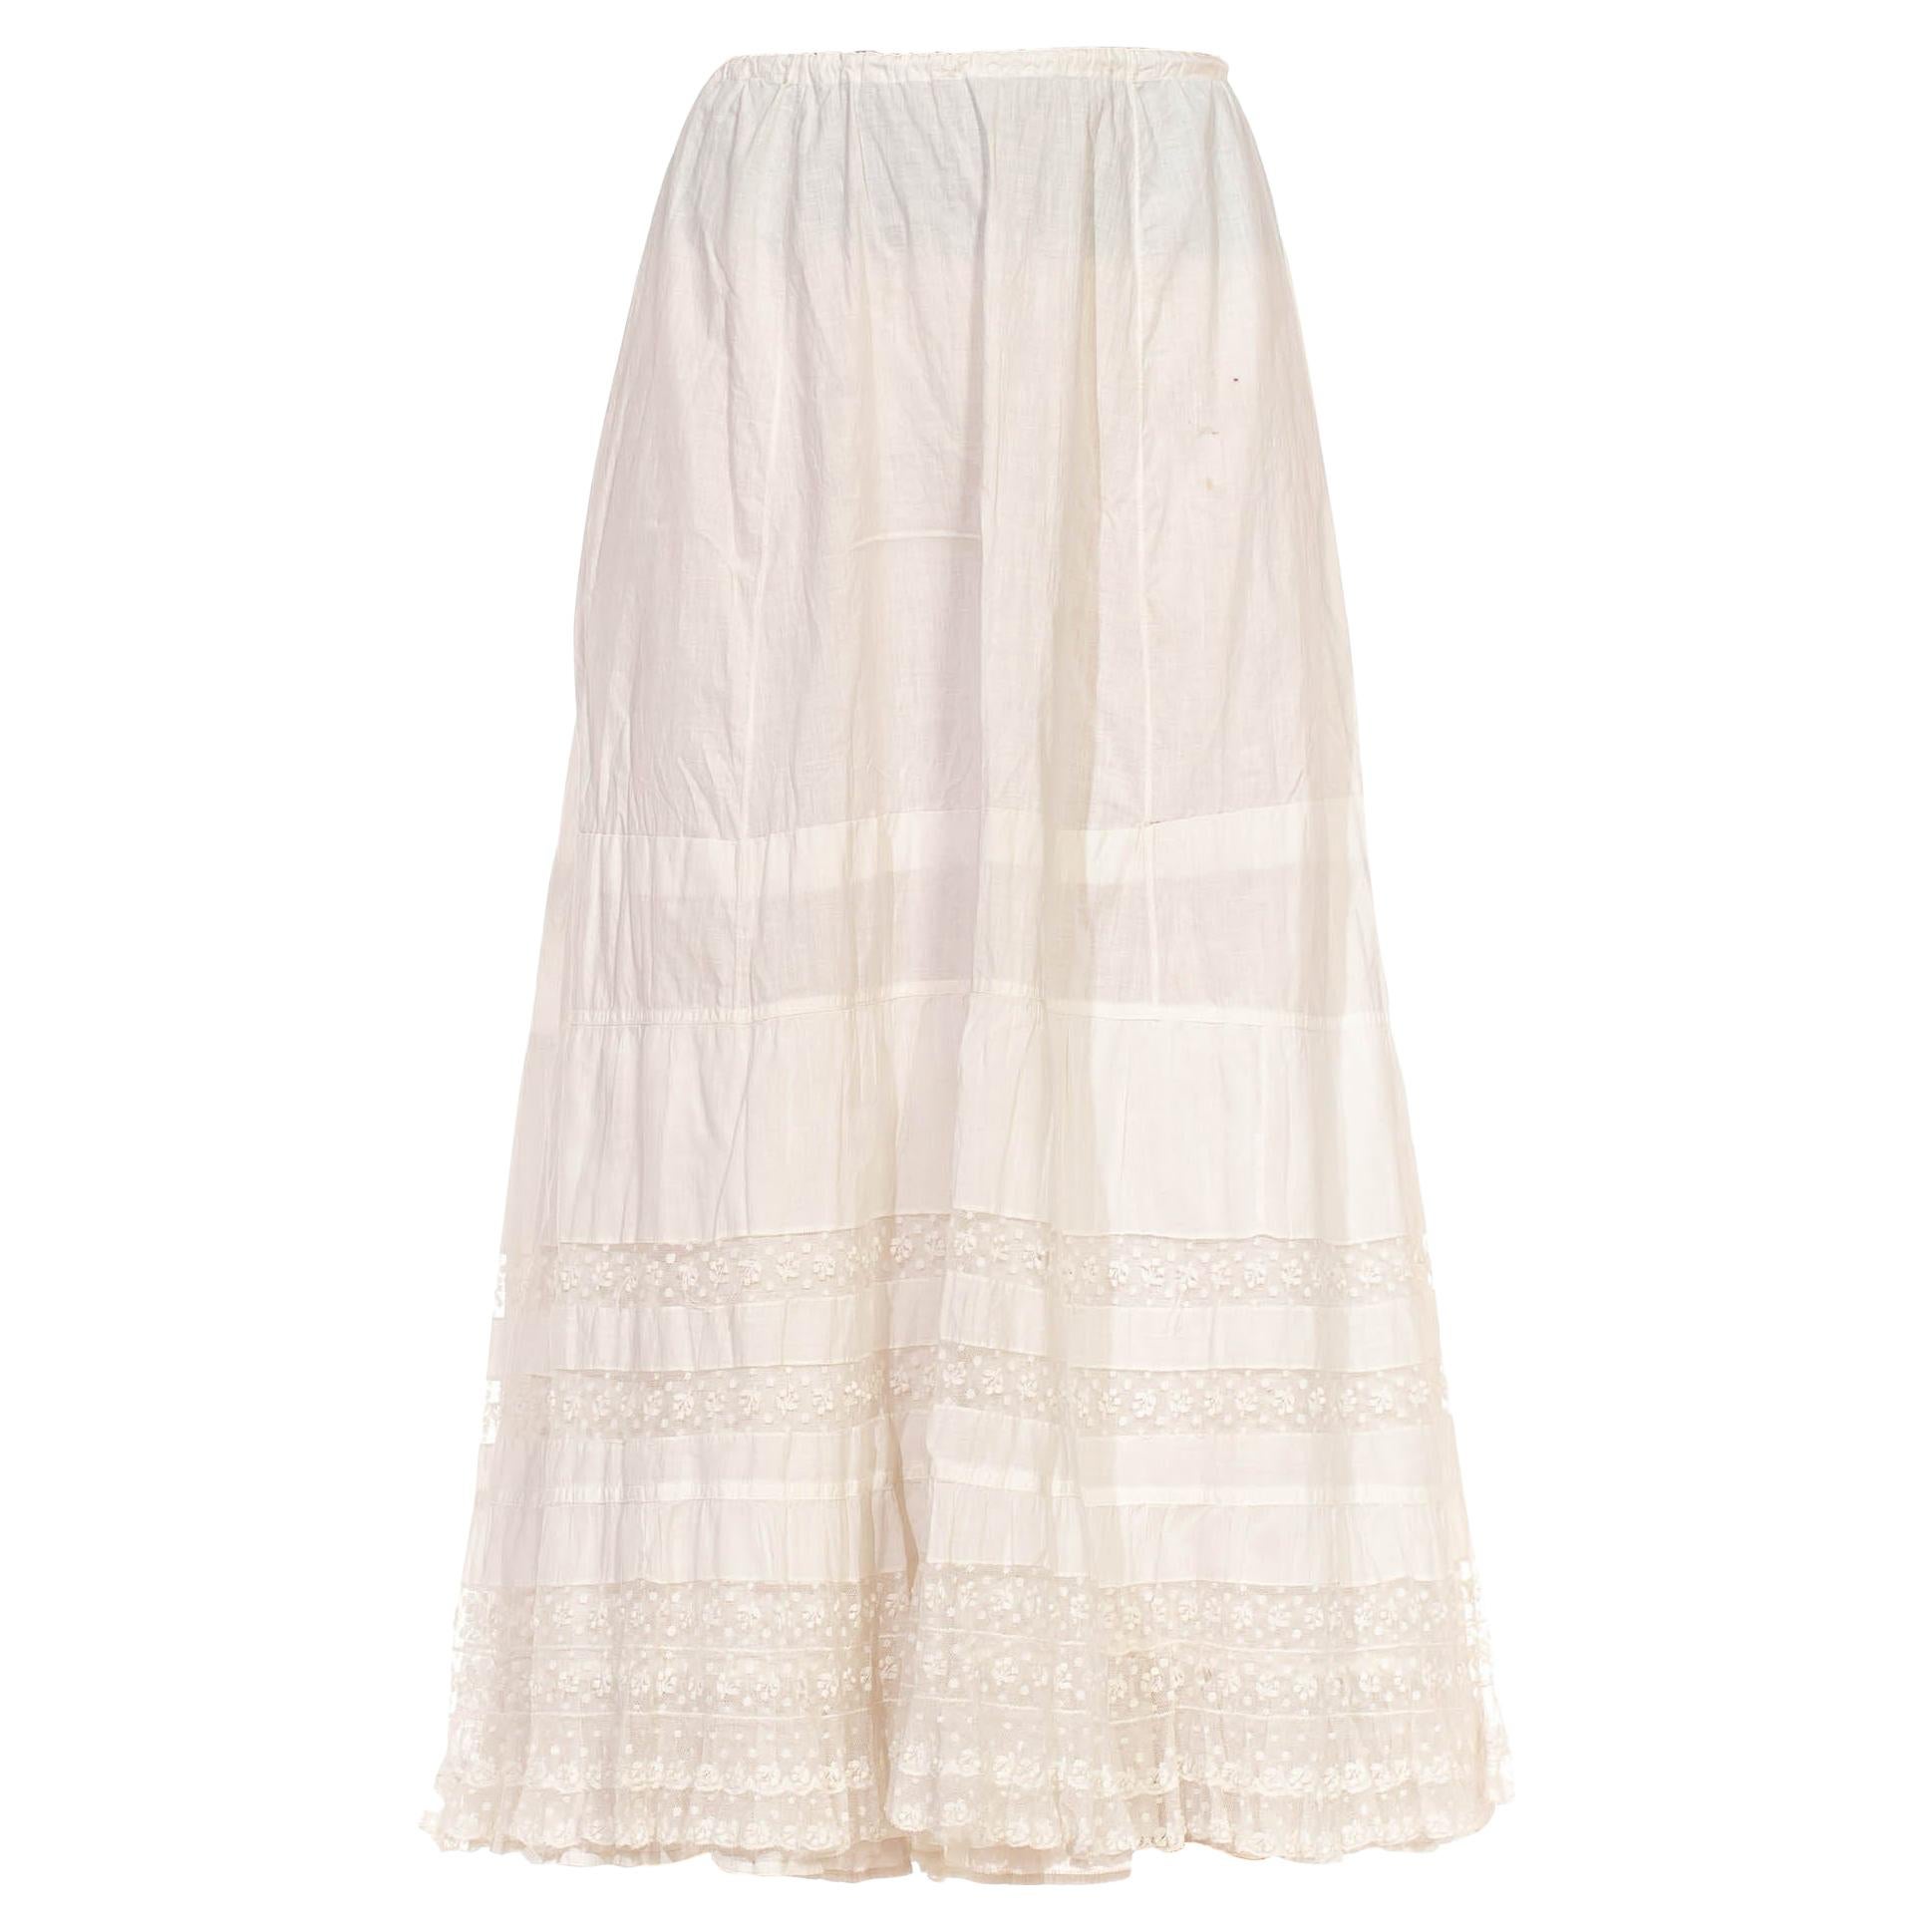 Victorian White Organic Cotton Skirt With Cherry Lace For Sale